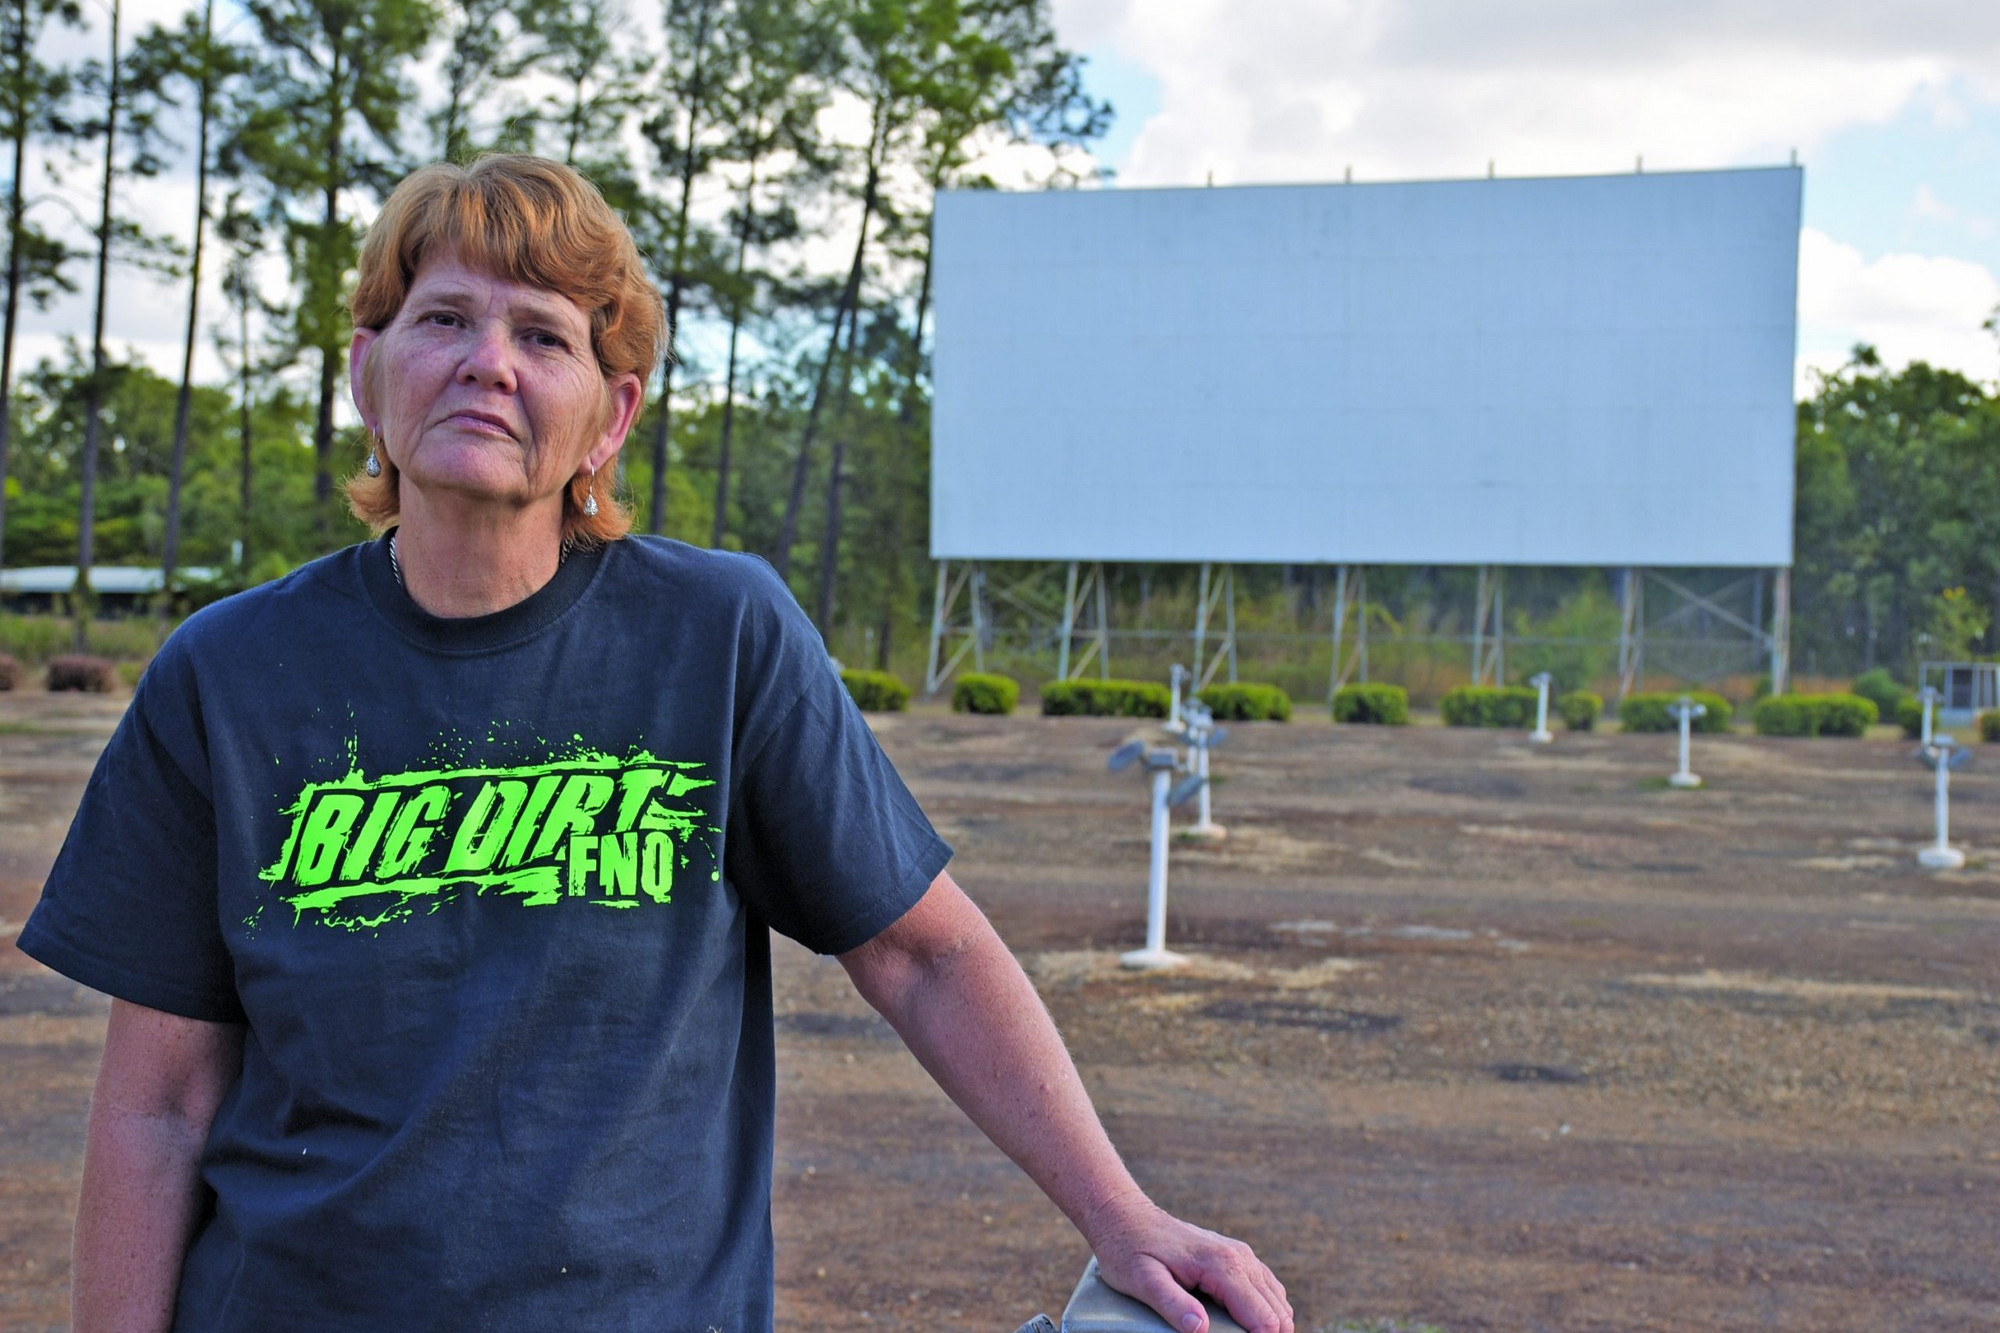 Drive-in set to reopen after COVID closure - feature photo